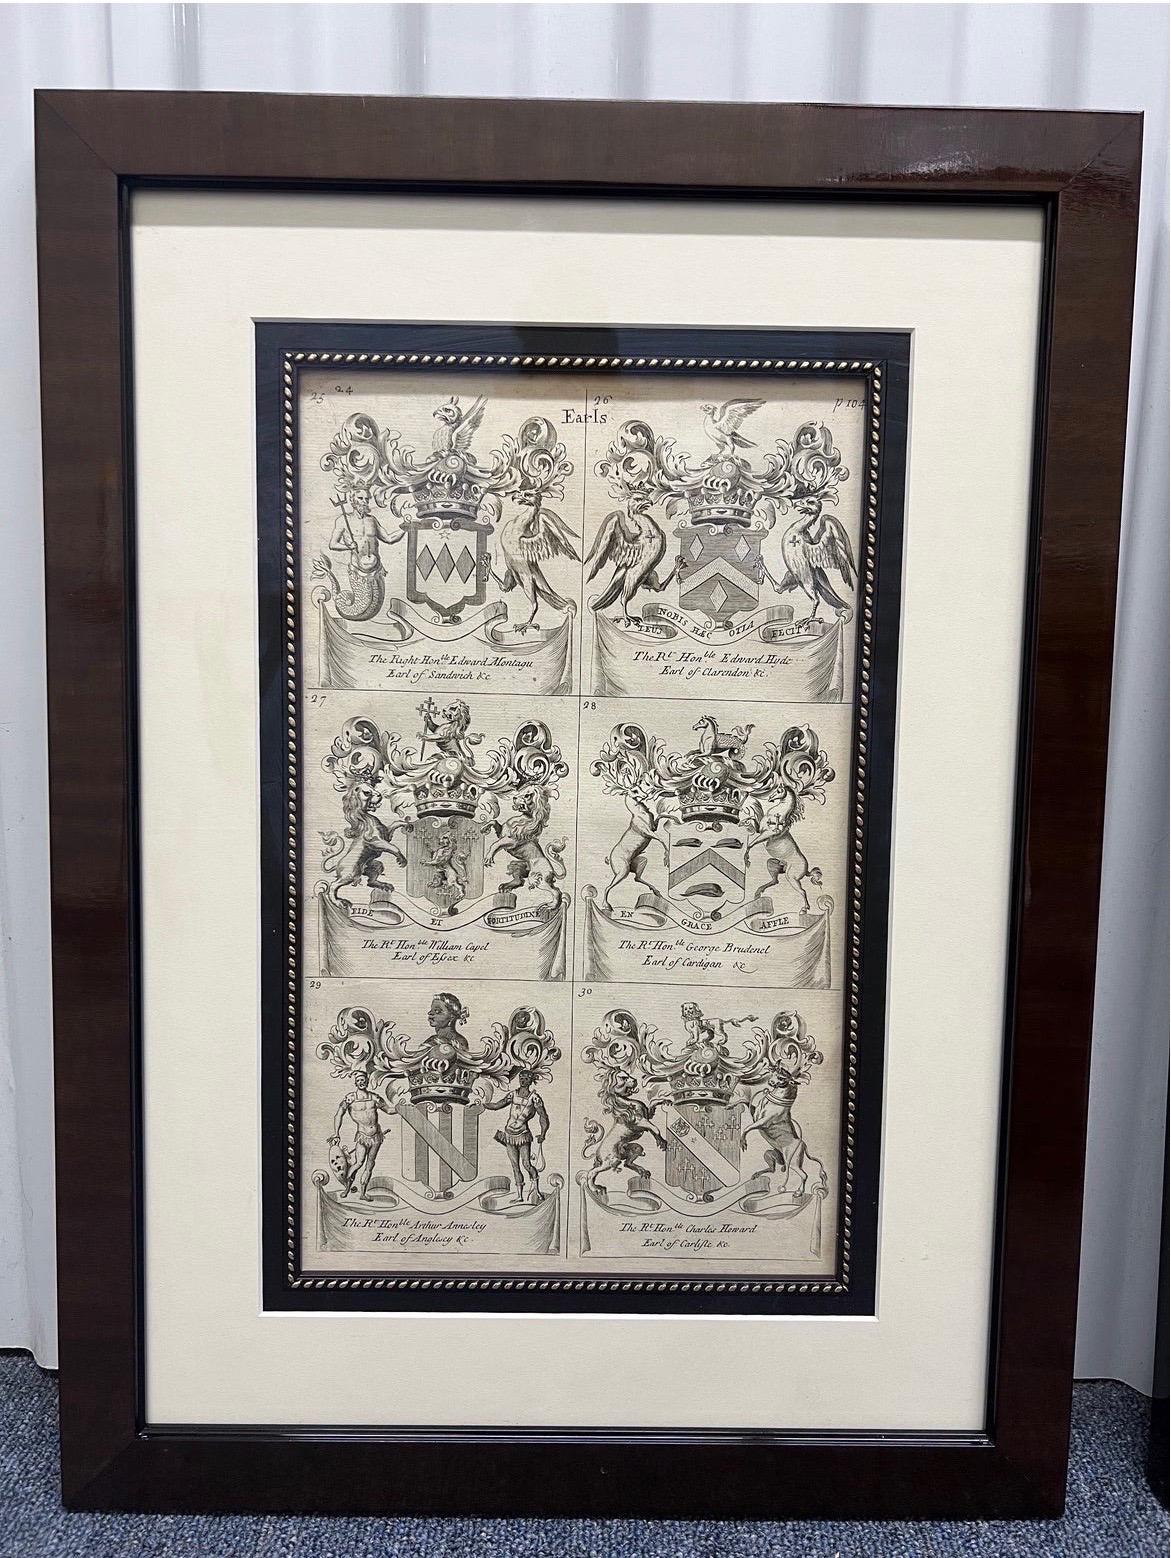 Expert and high end framing done for these 4 armorial plates. Continental “earls”. Stunning presentation.